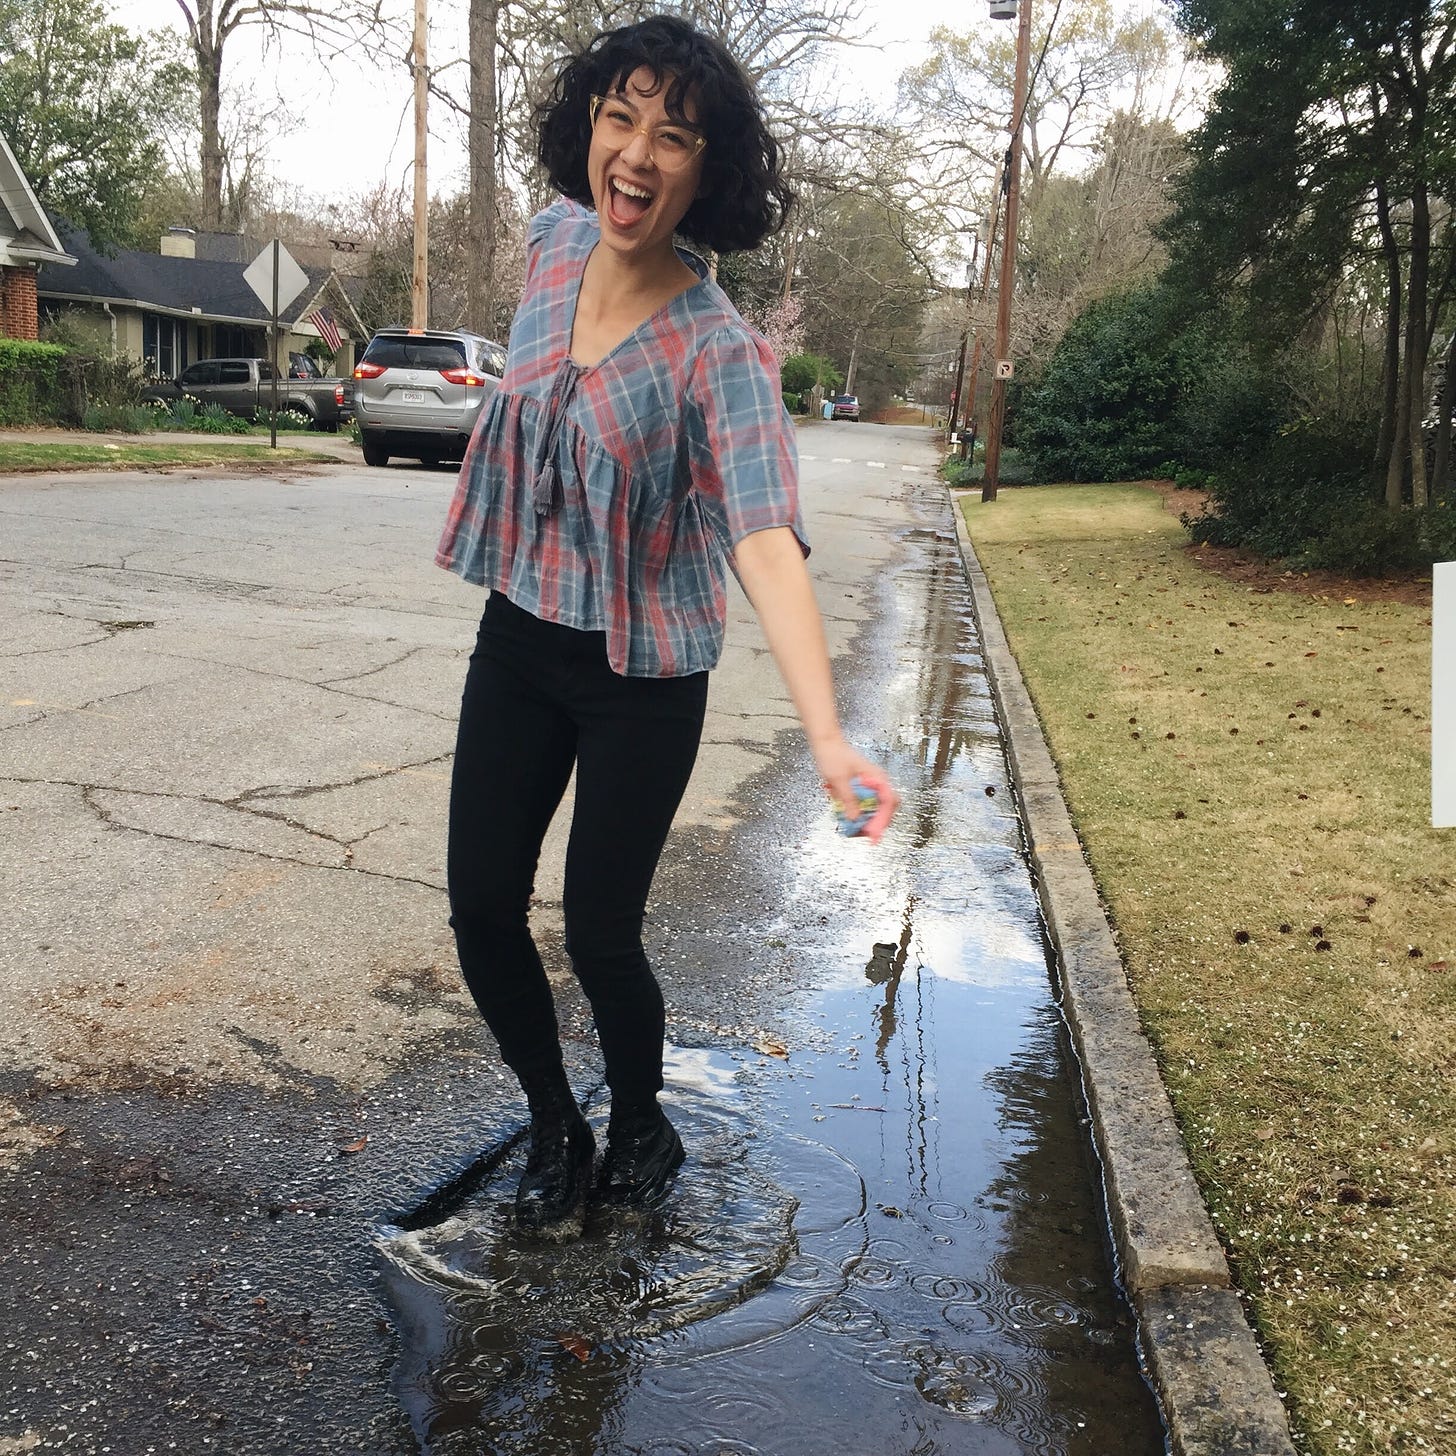 A picture of the author, a Japanese American with a curly bob, jumping in a puddle on a dreary day.